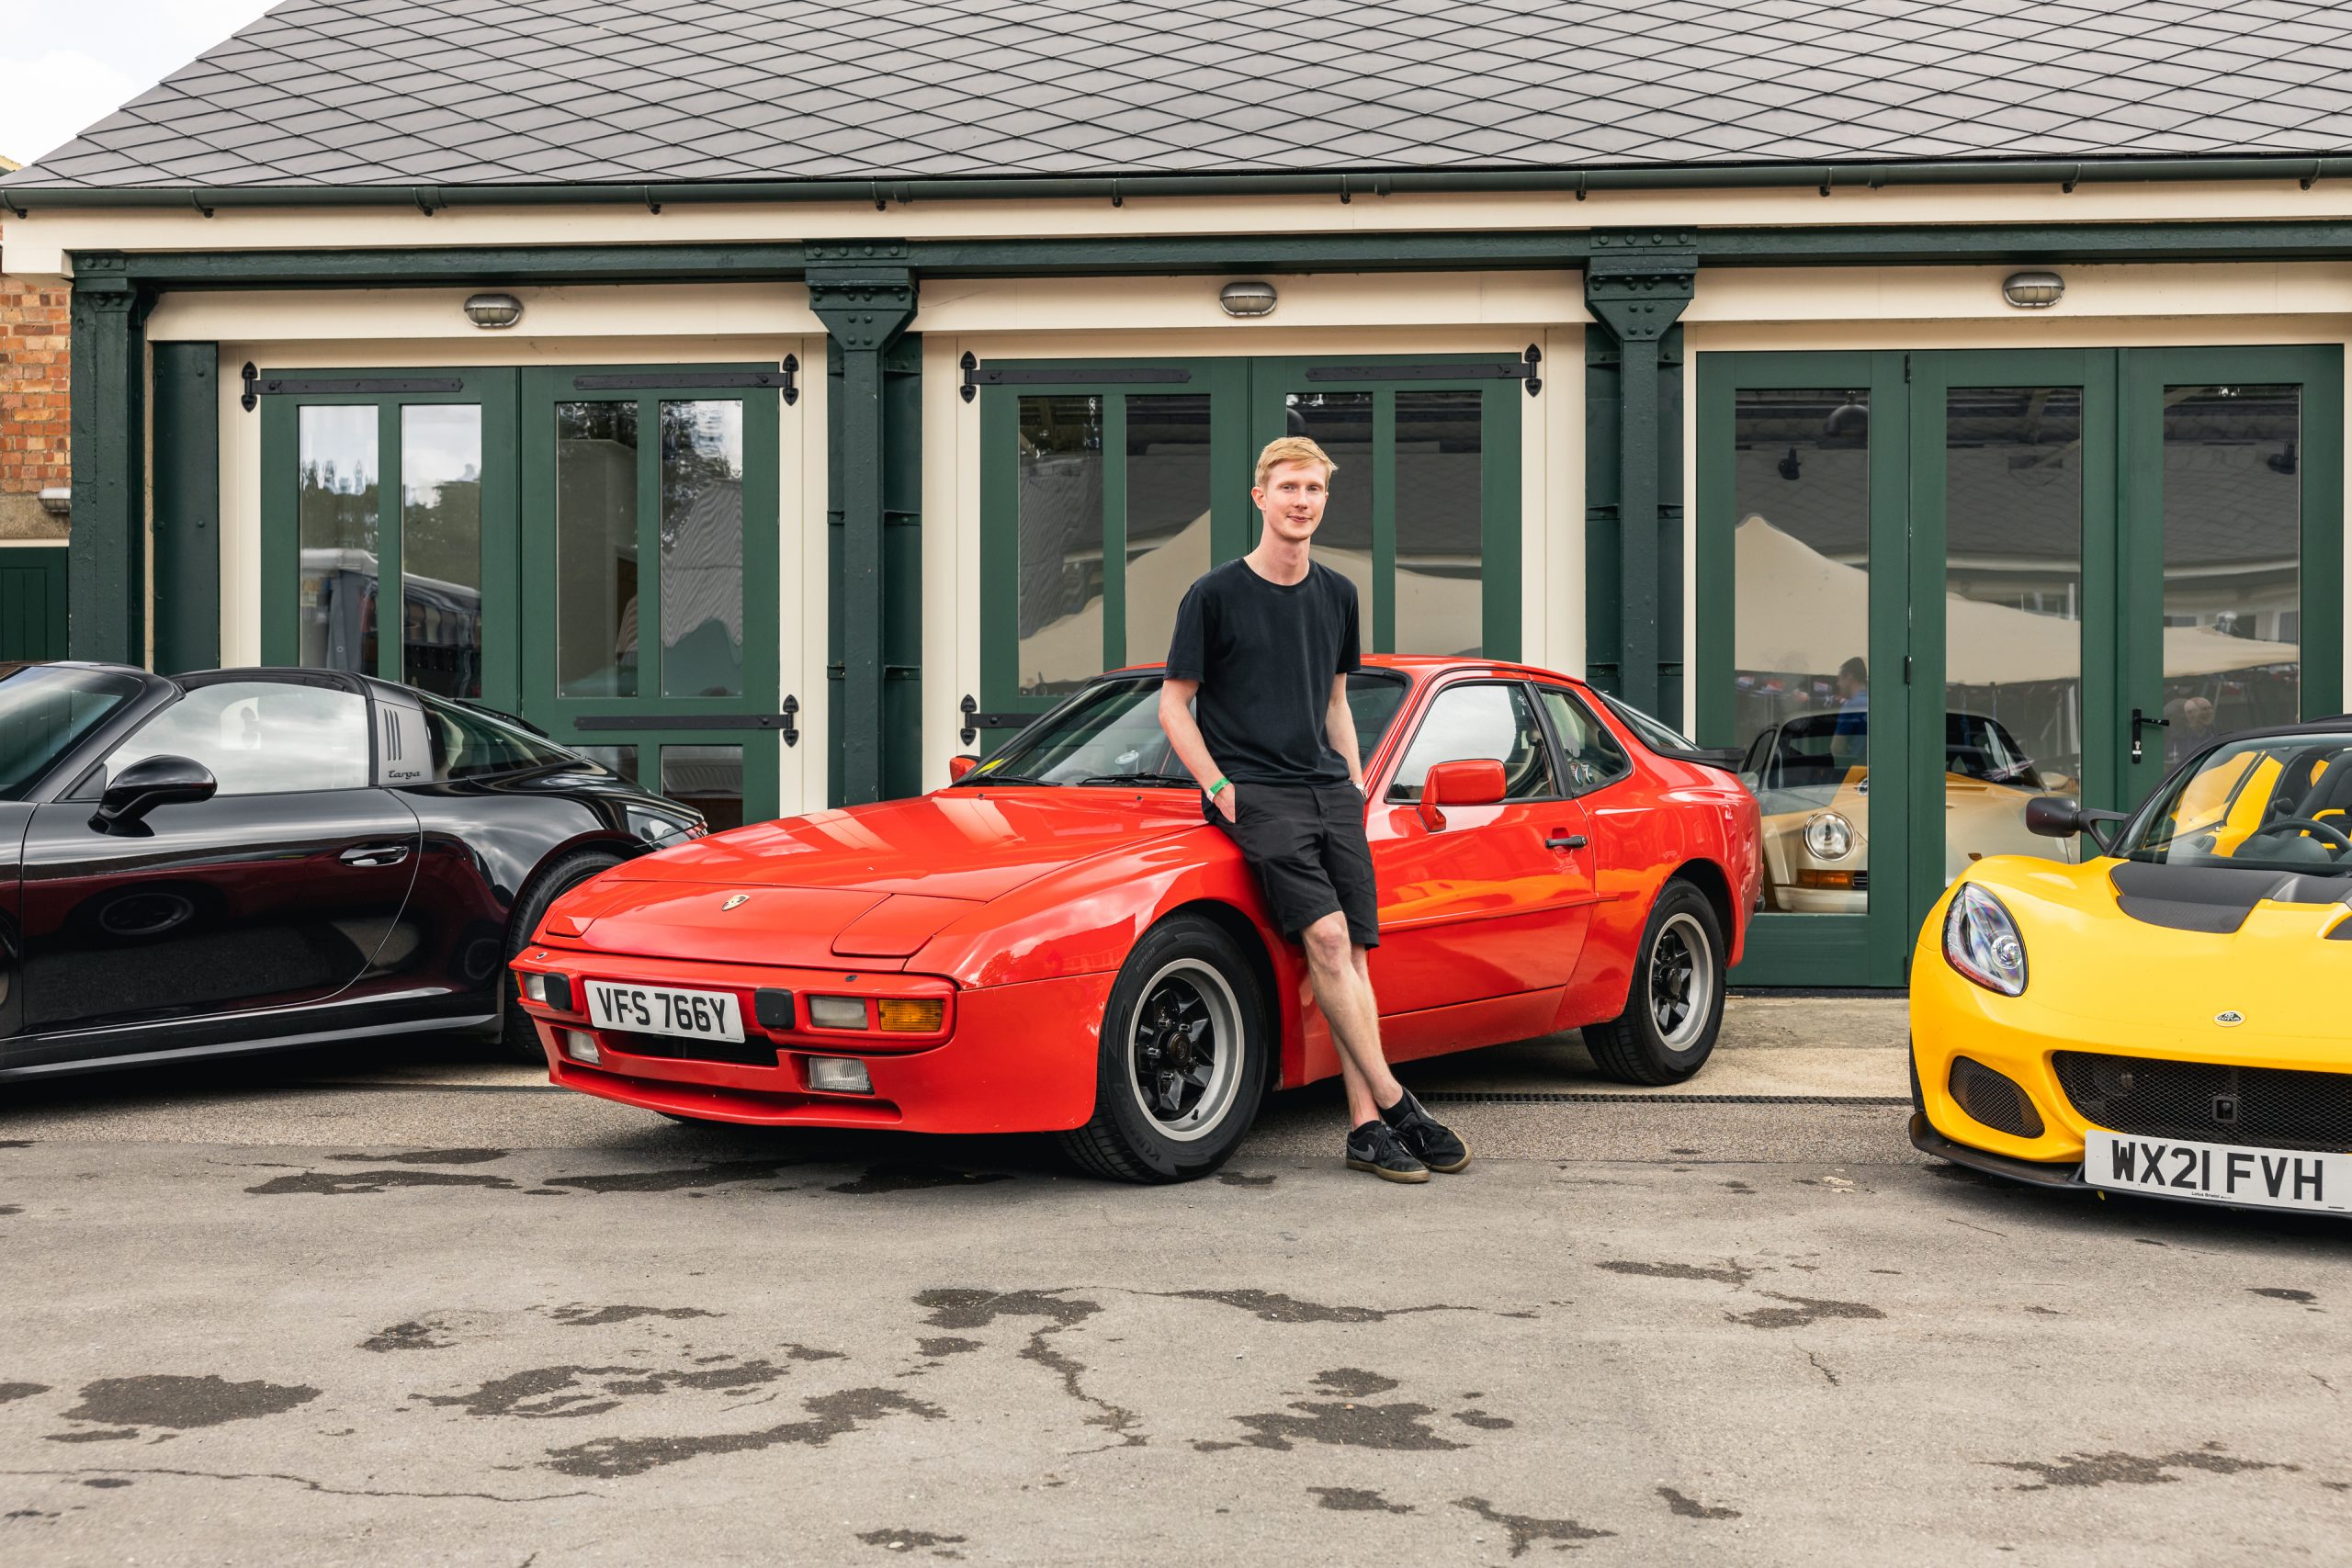 Your Classics: Connor Hawkins enjoys his Porsche 944 all year round